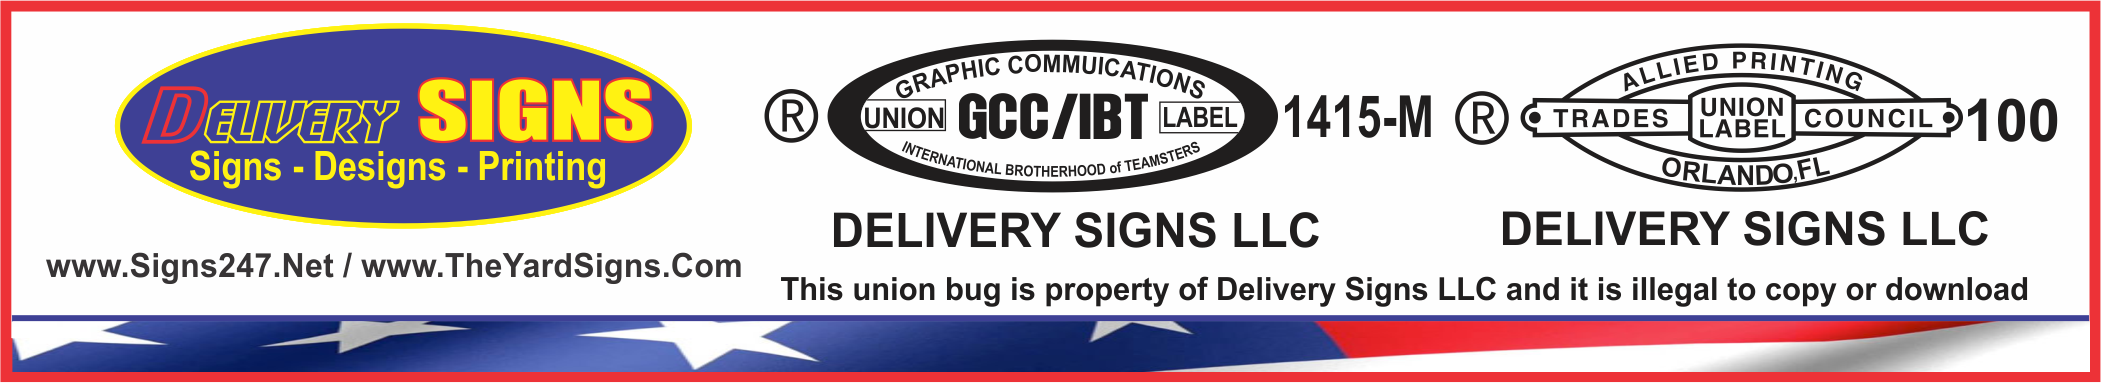 Union Made Campaing Yard Signs & Printing, Made in USA